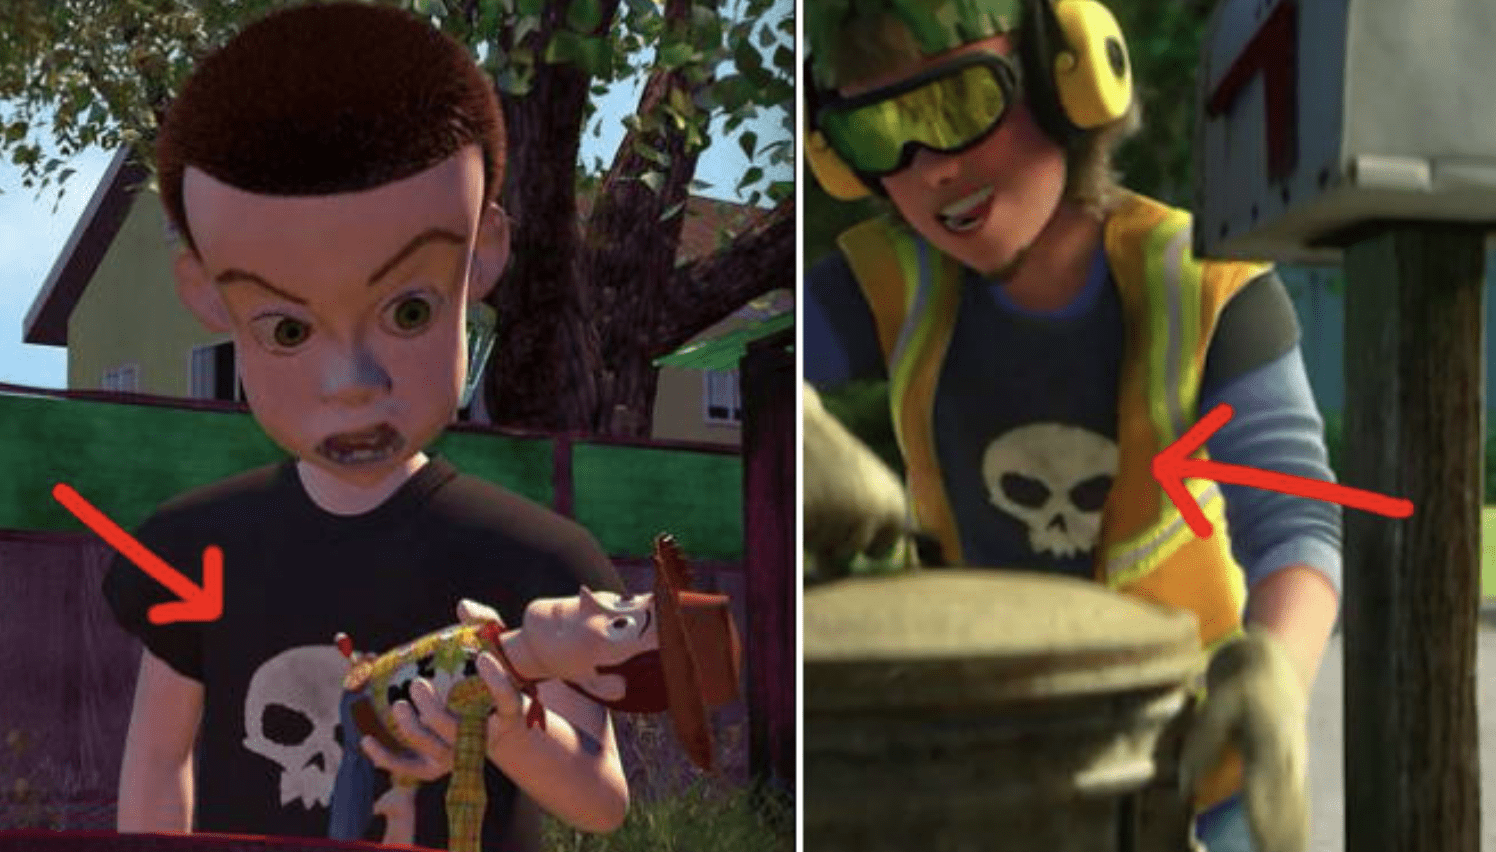 4. In Toy Story 3, they brought back Sid as a grown up. 